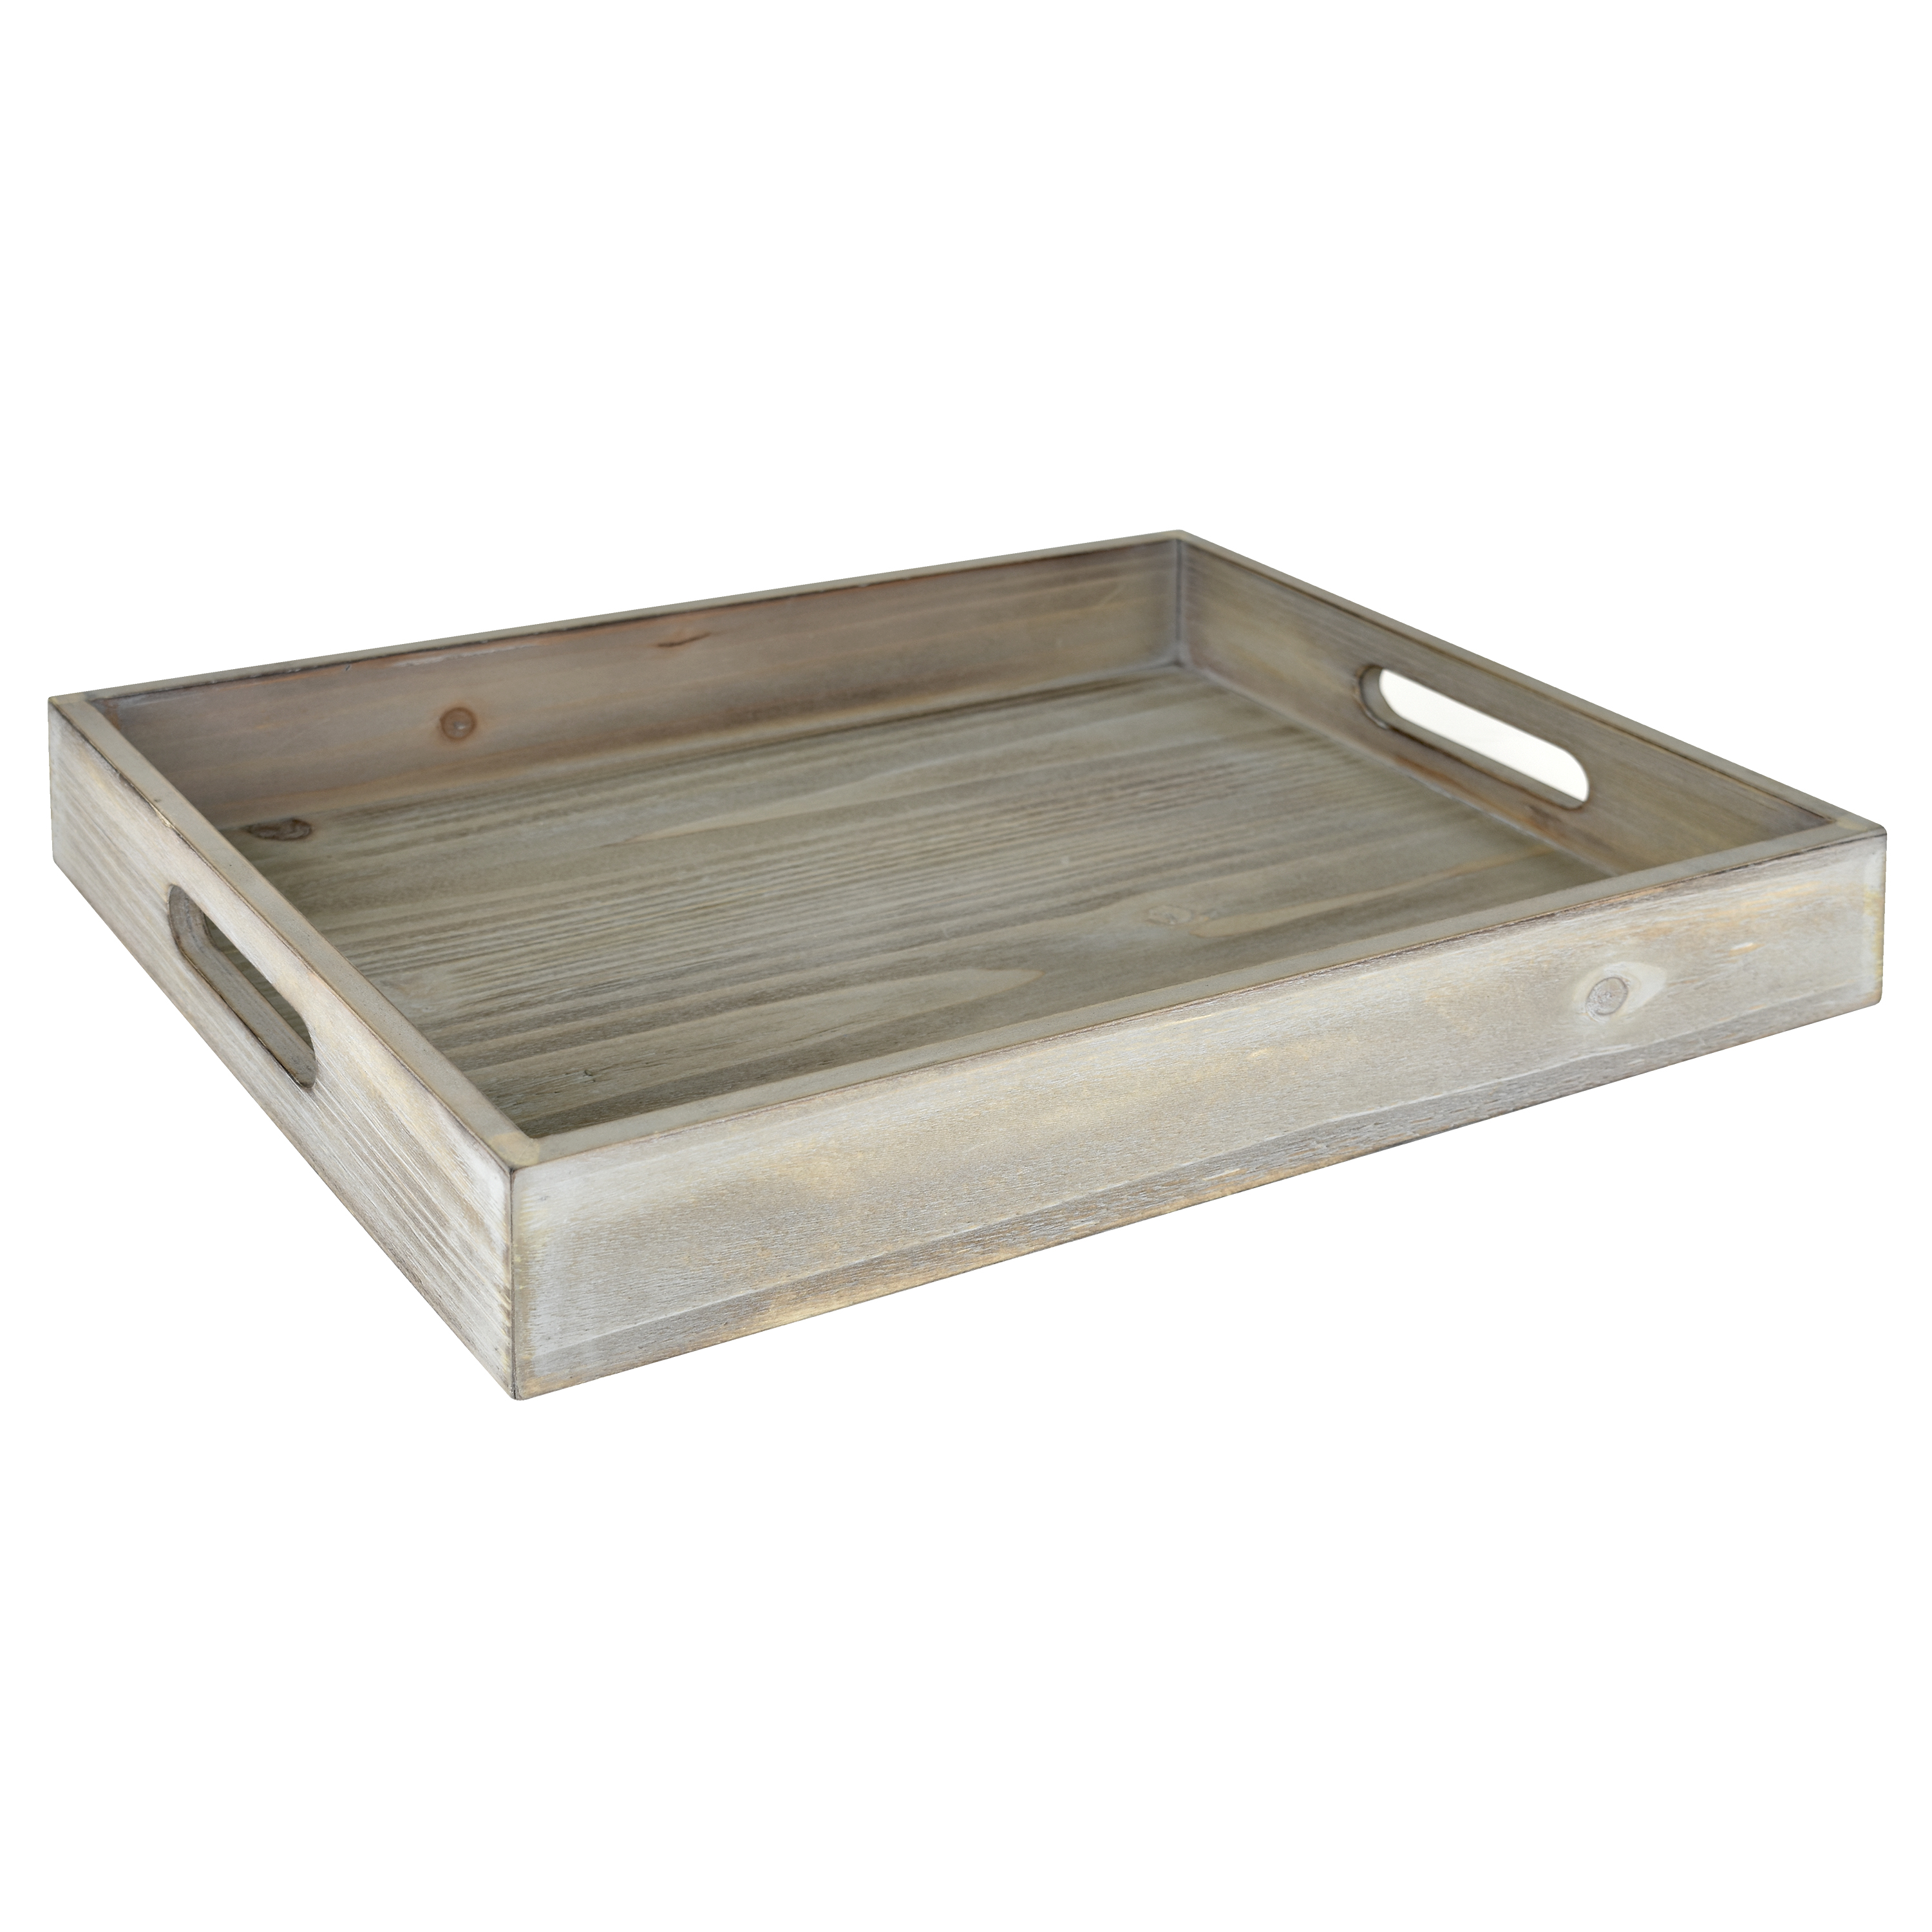 Mainstays Tabletop Rectangle 16" x 12" x 2.5" Wooden Tray, Gray Wash - image 1 of 4